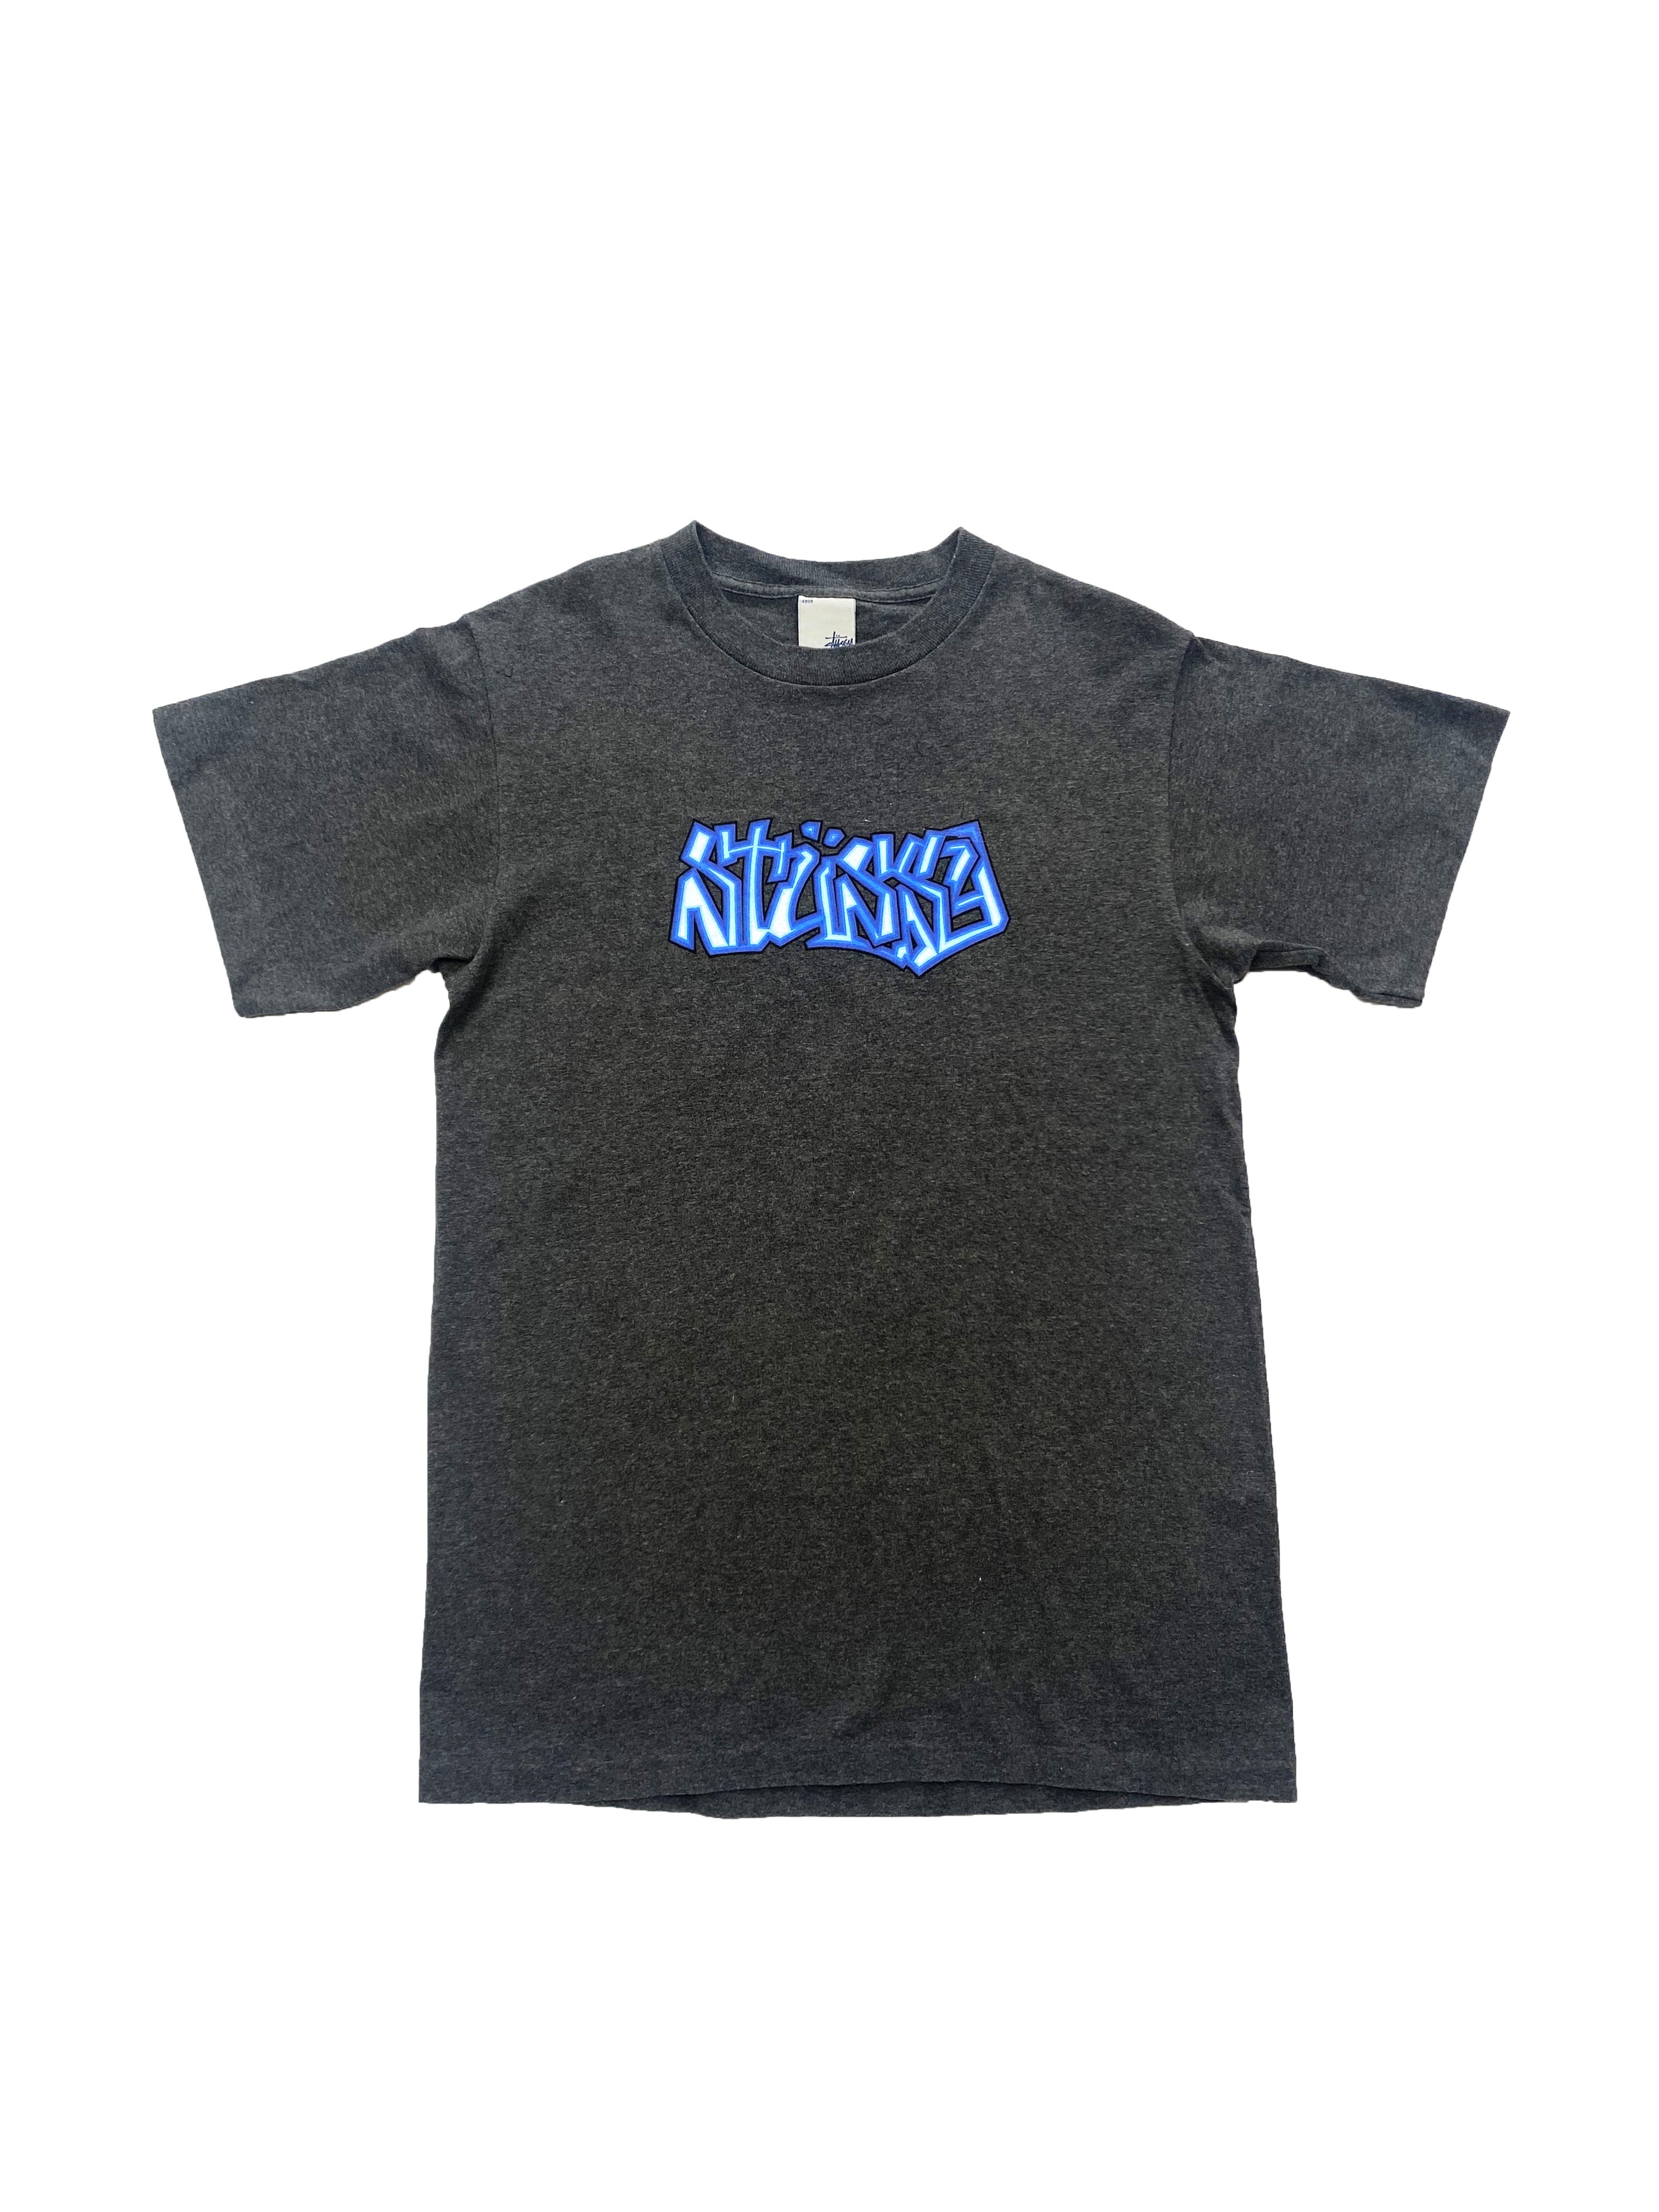 Stussy Grey Spell Out Tee 00's